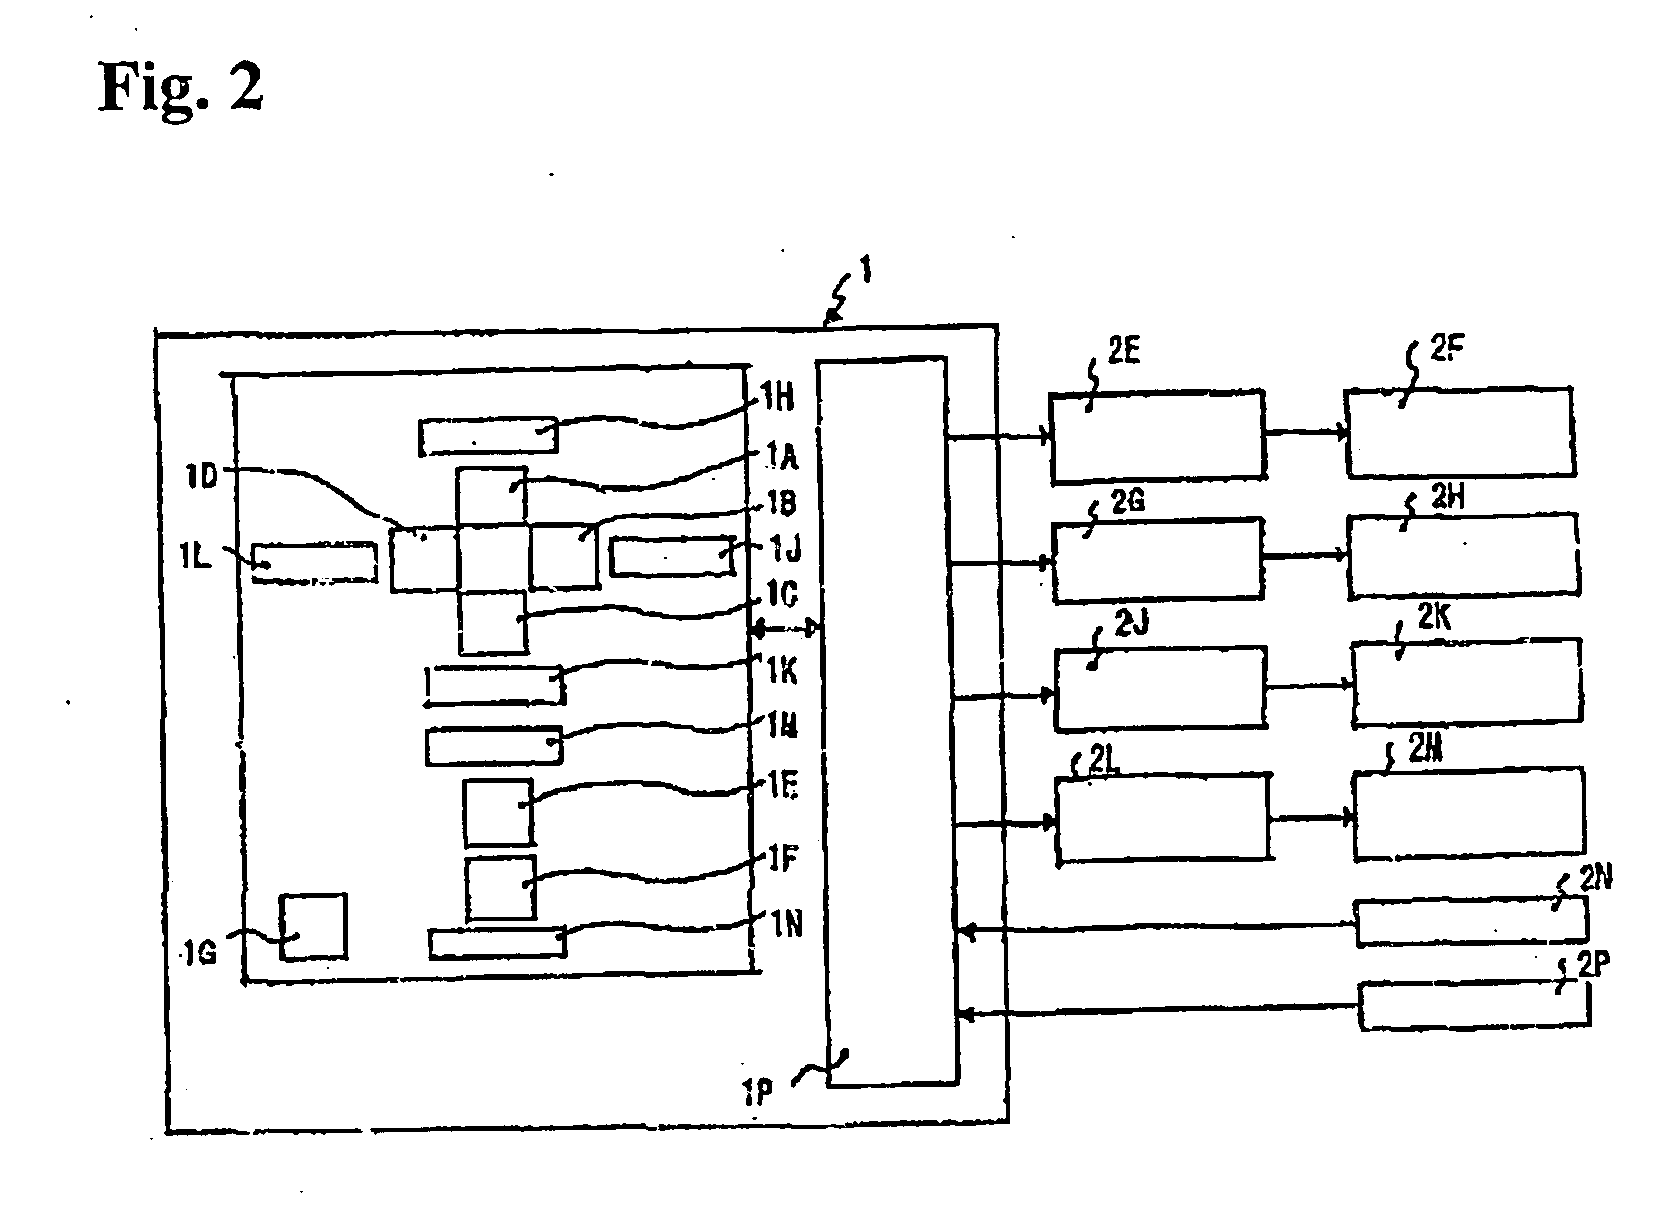 Support apparatus for X-ray detector